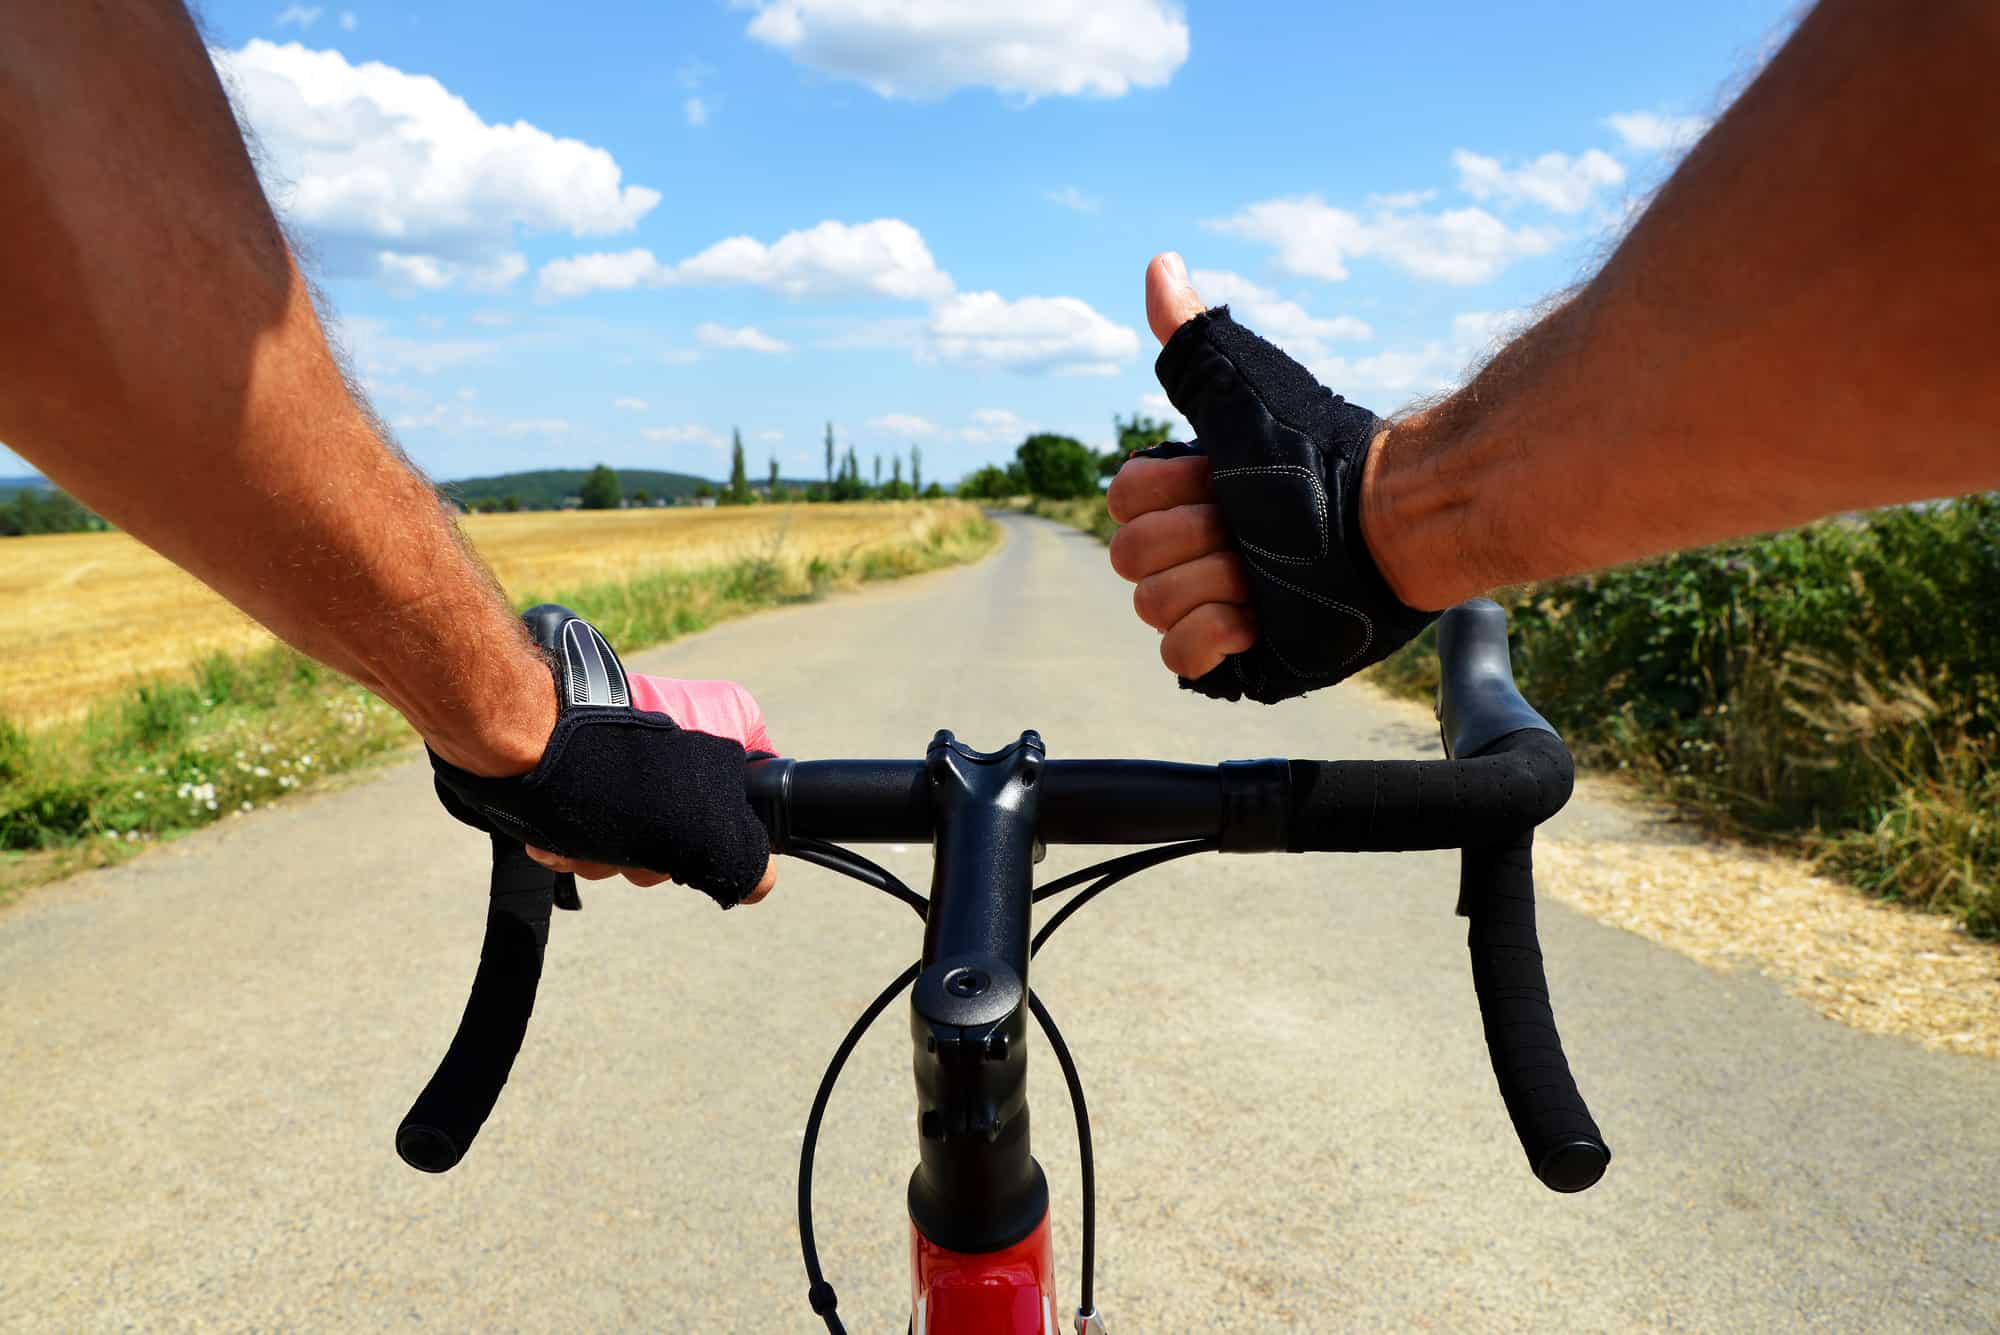 cycling while wearing gloves